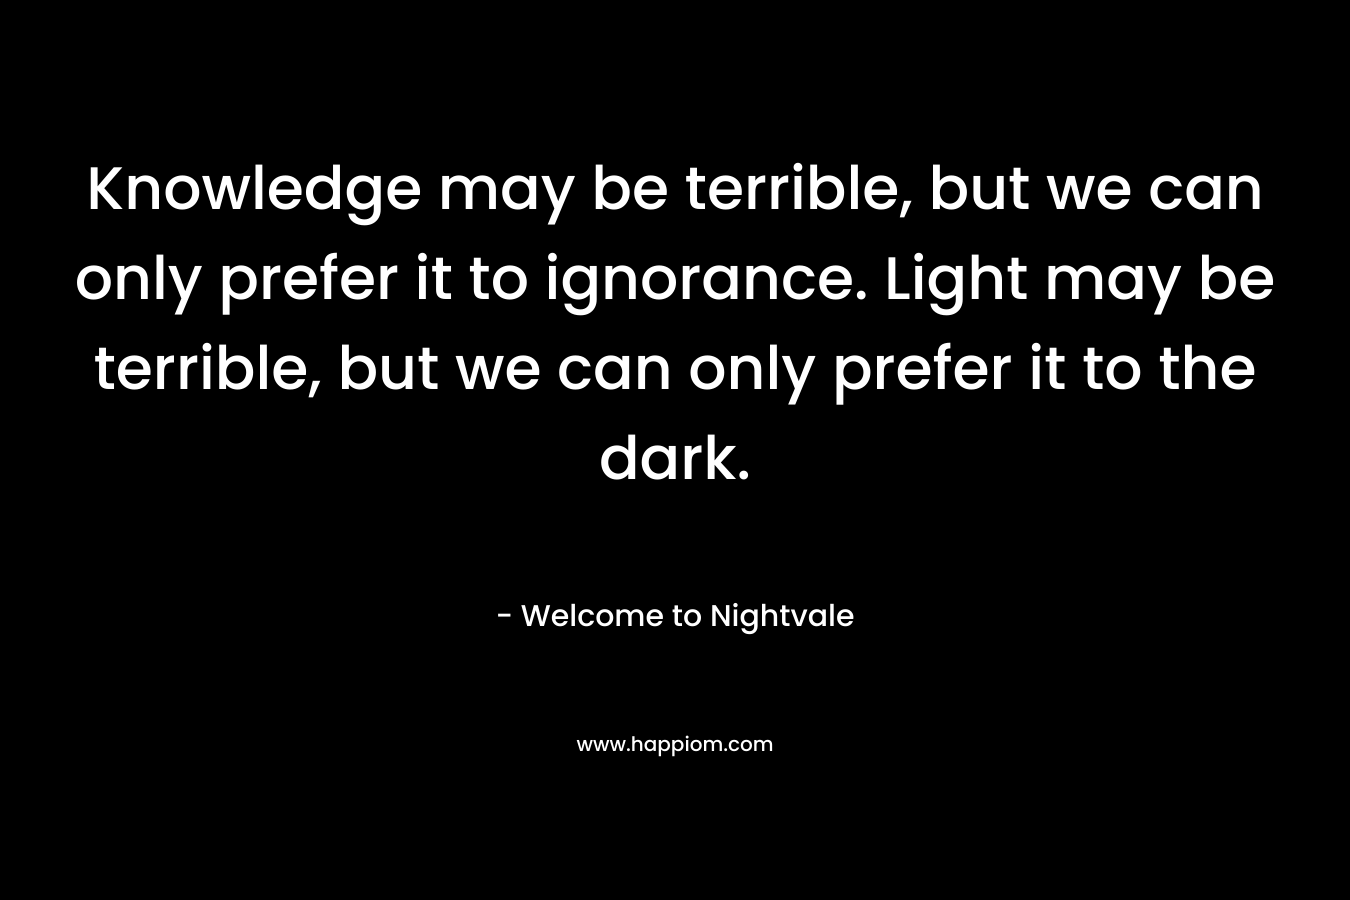 Knowledge may be terrible, but we can only prefer it to ignorance. Light may be terrible, but we can only prefer it to the dark.